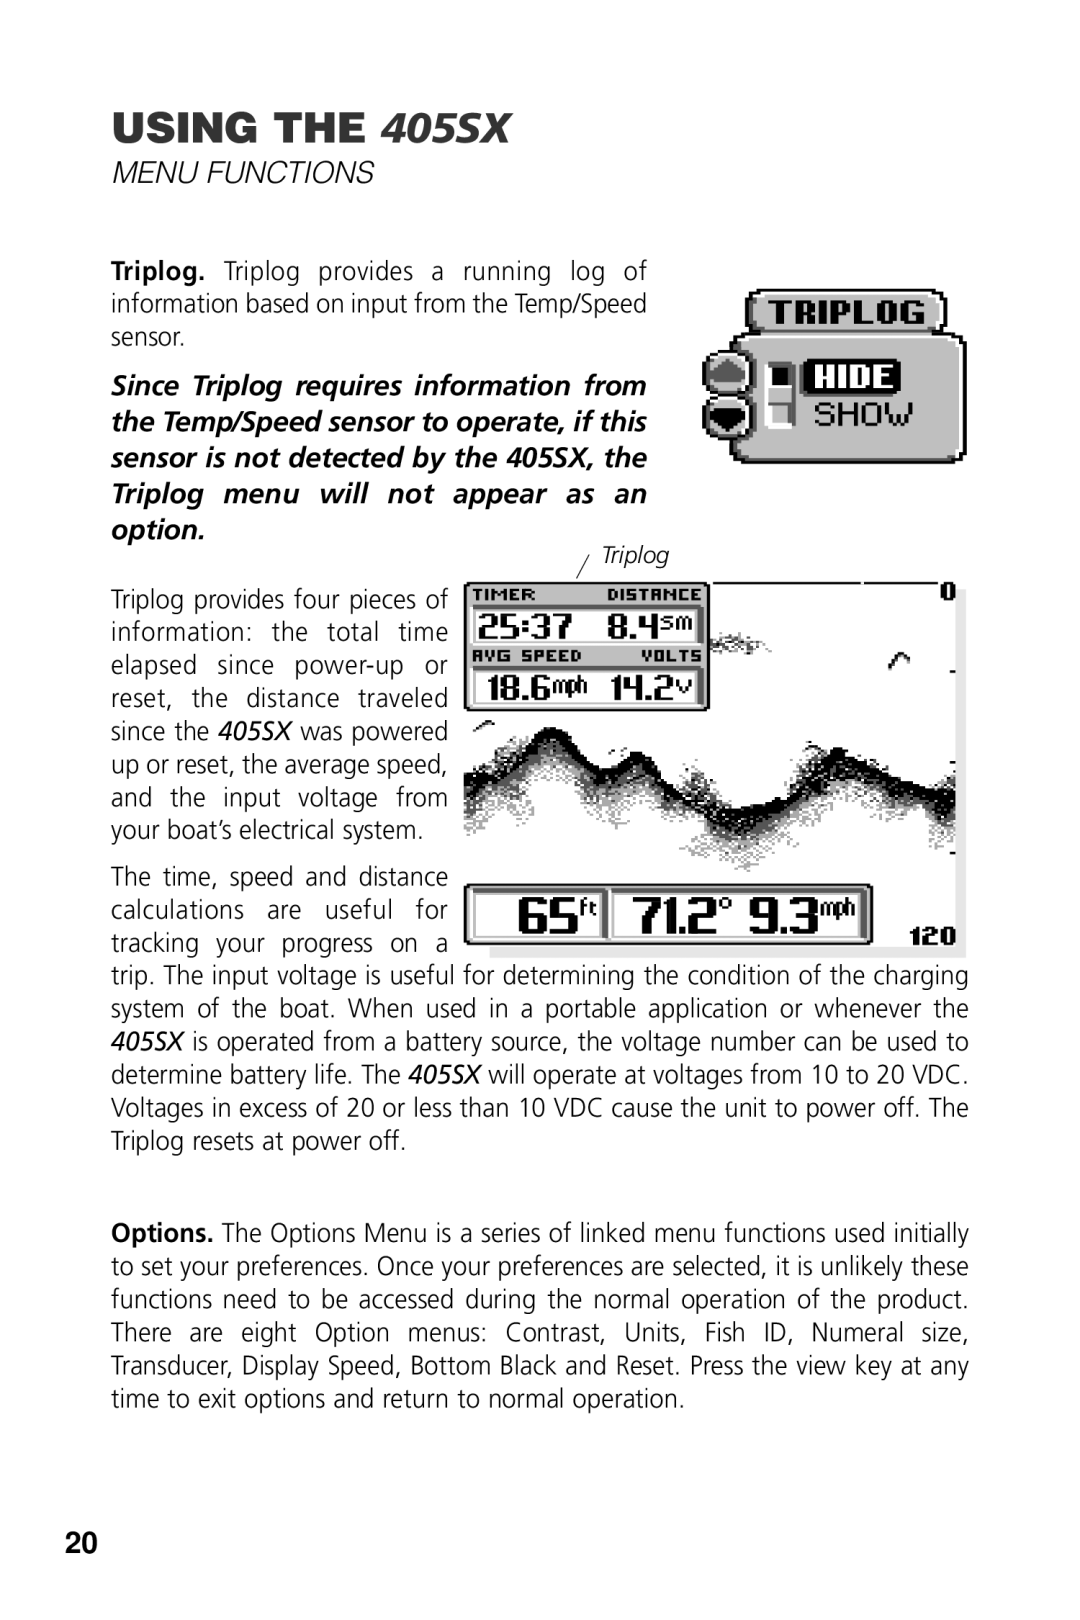 Humminbird manual USING THE 405SX, Menu Functions, The time, speed and distance 